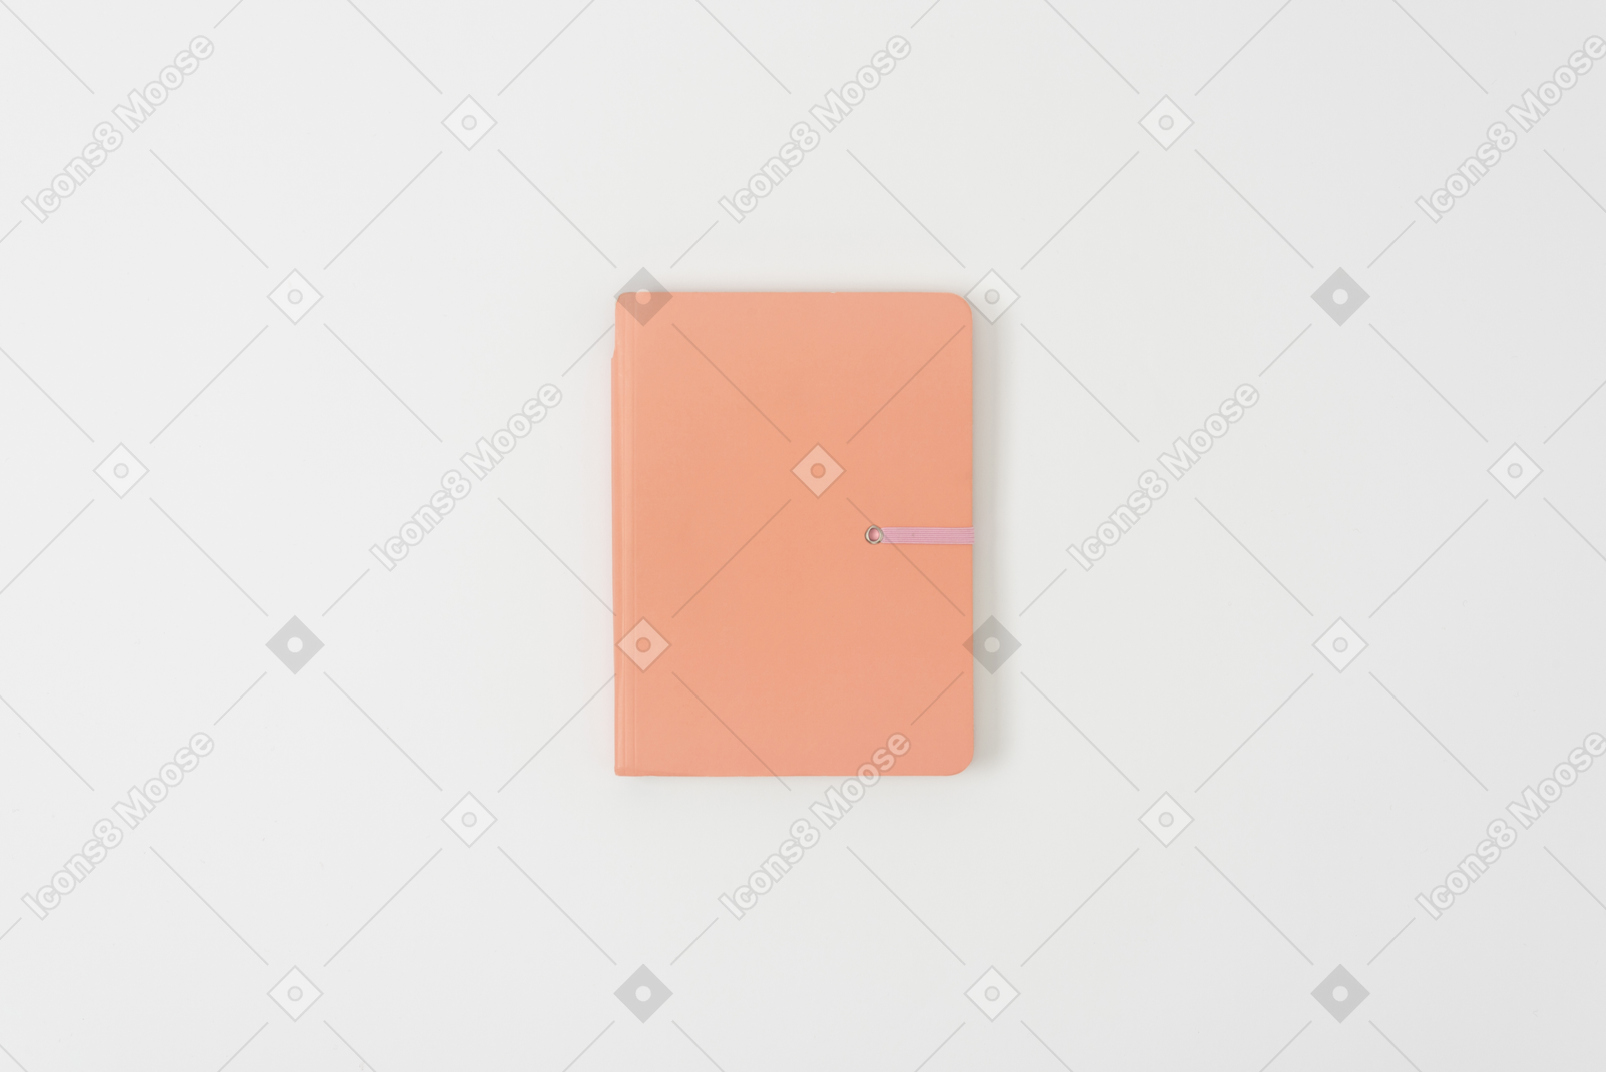 Convenient for taking notes on-the-go